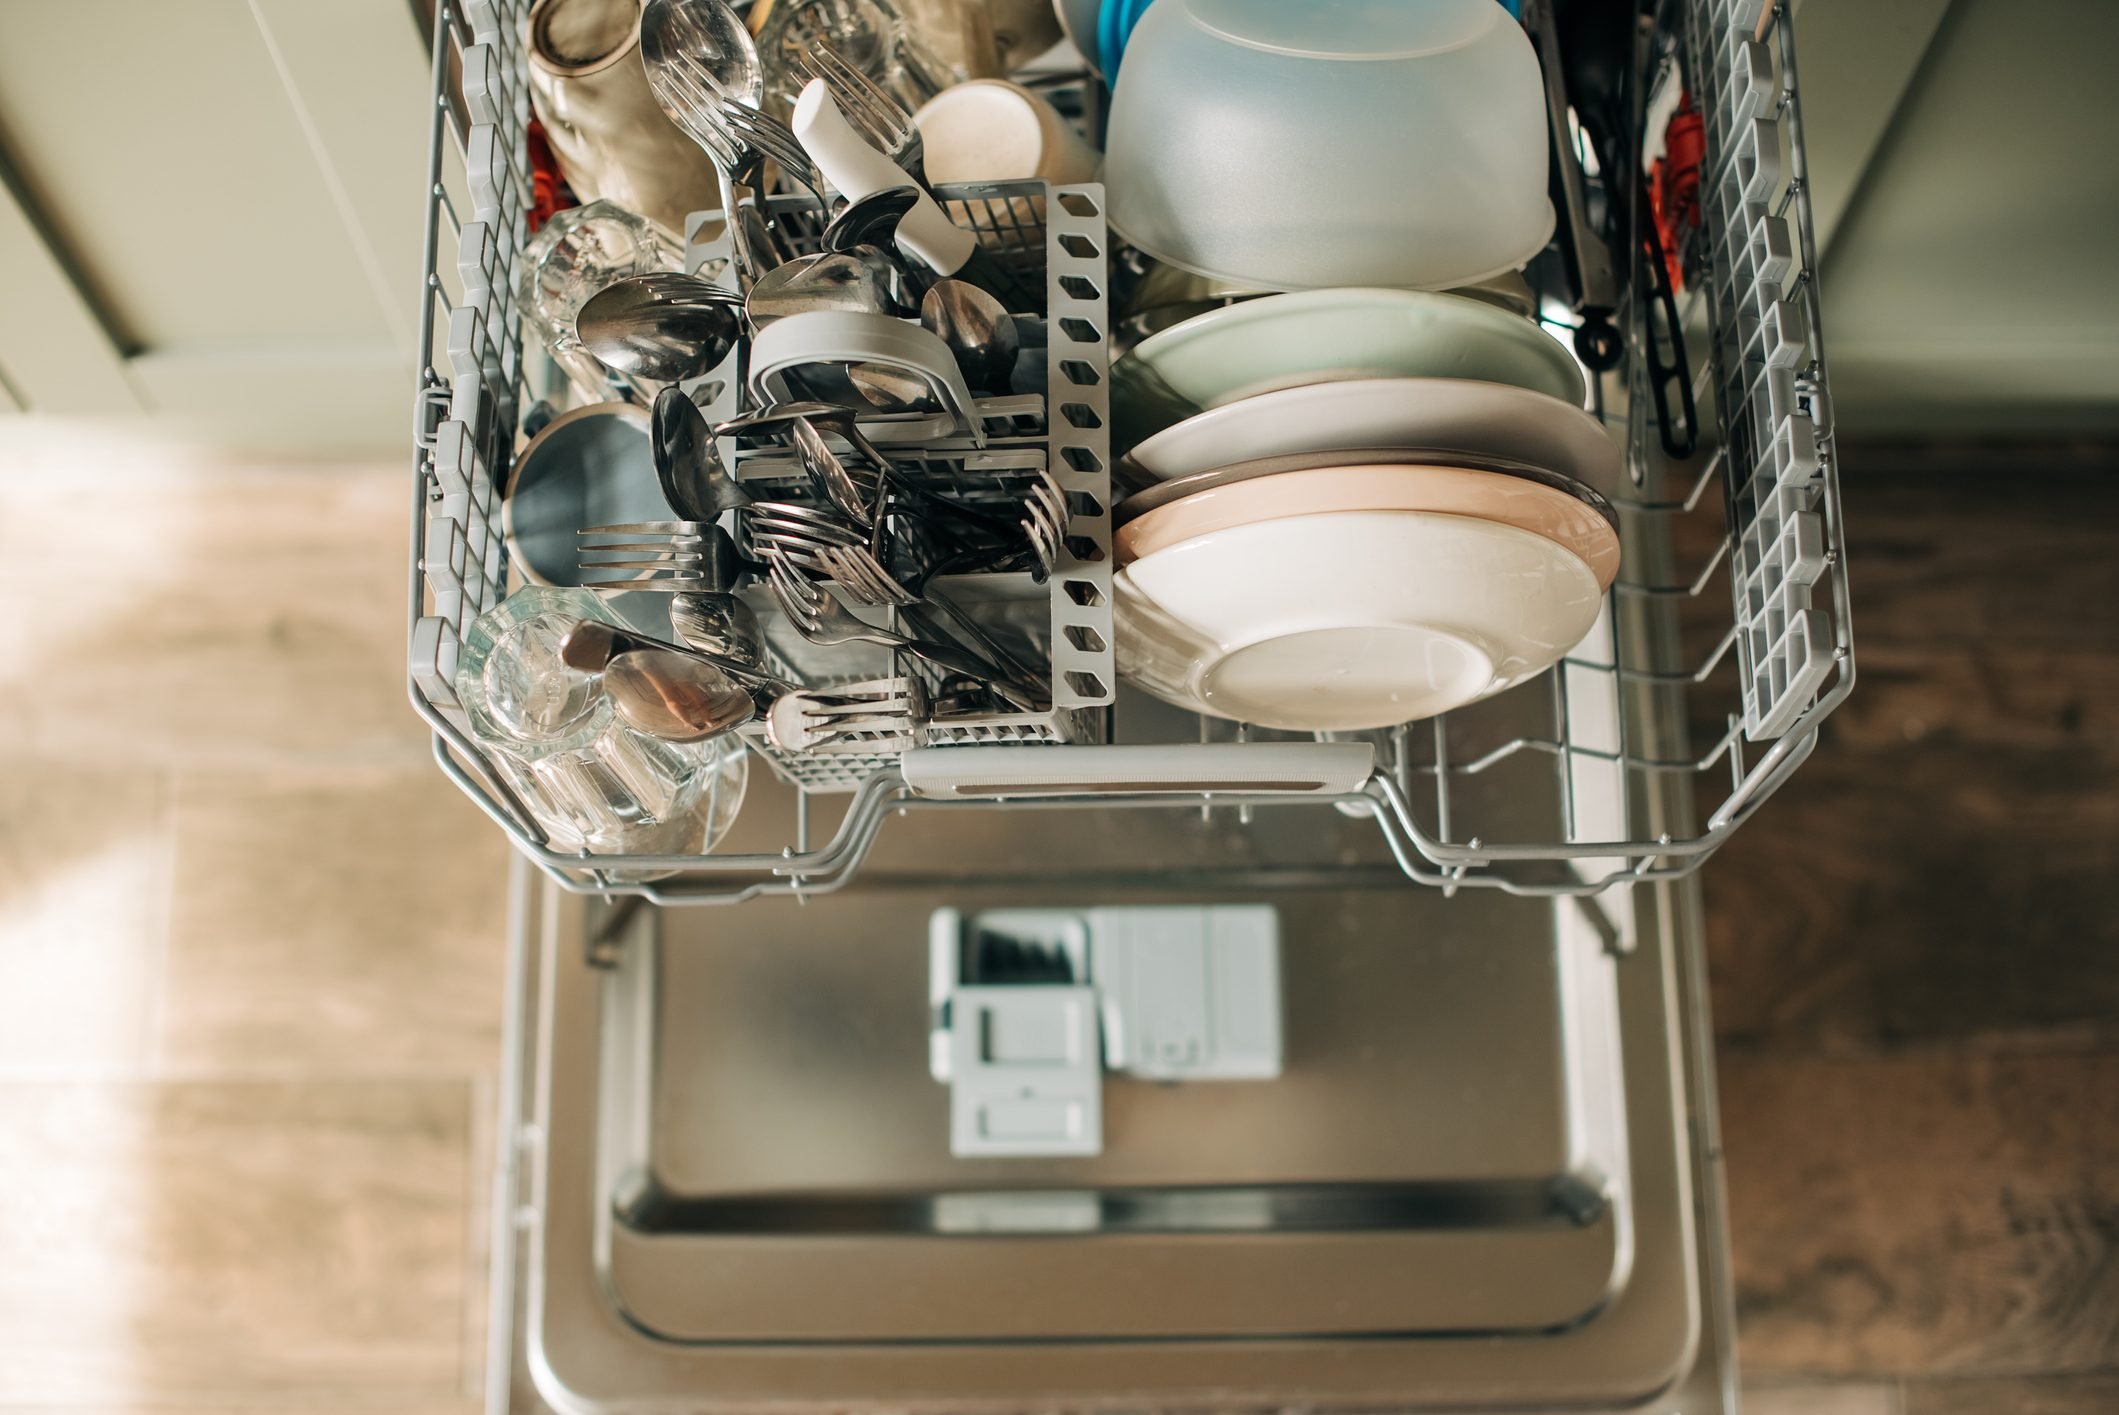 How To Use a Dishwasher Properly